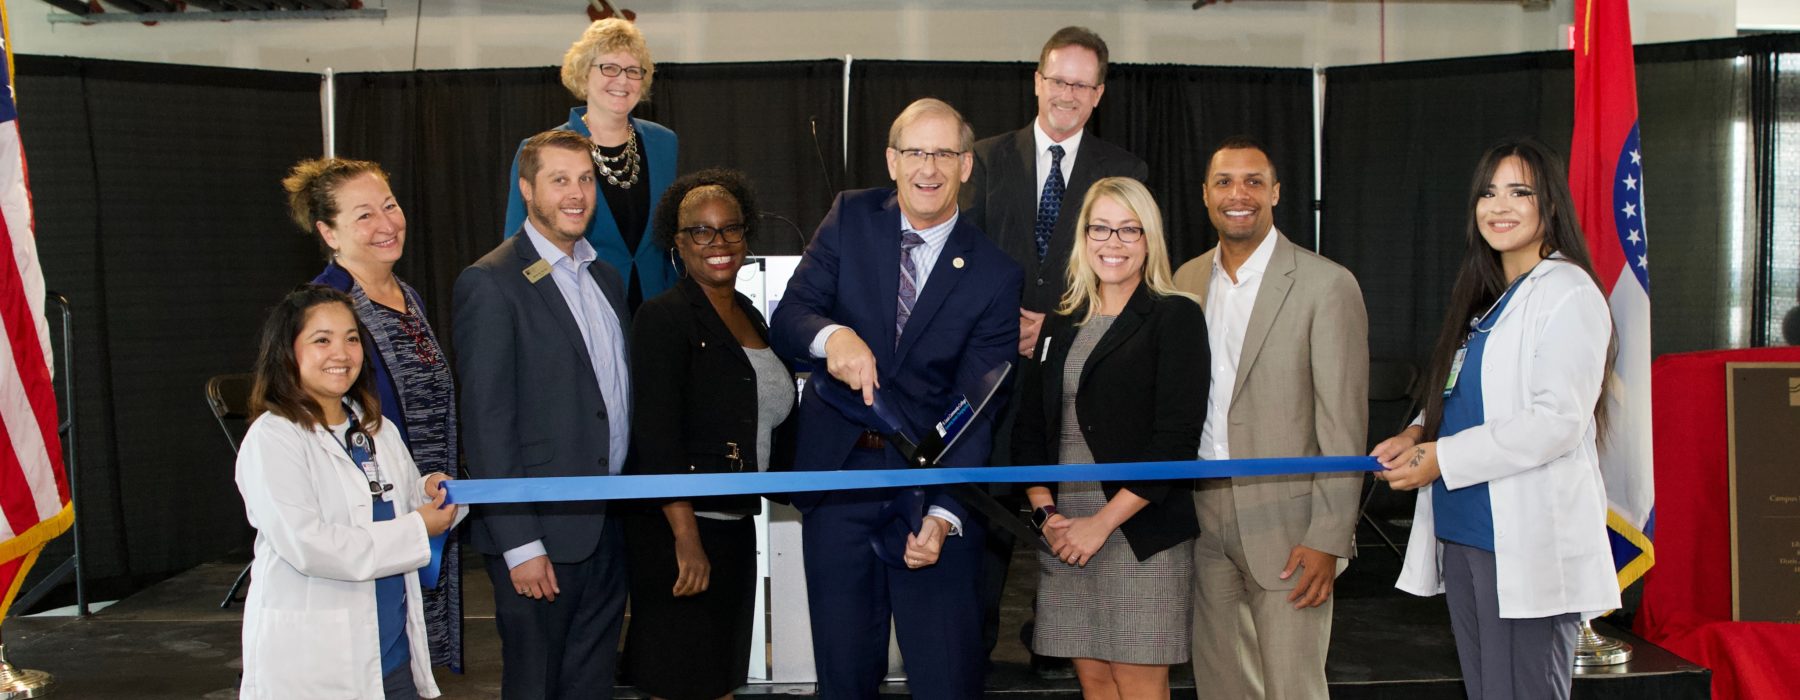 Ribbon Cutting Image for STLCC Center for Nursing and Health Sciences Opening Ceremony